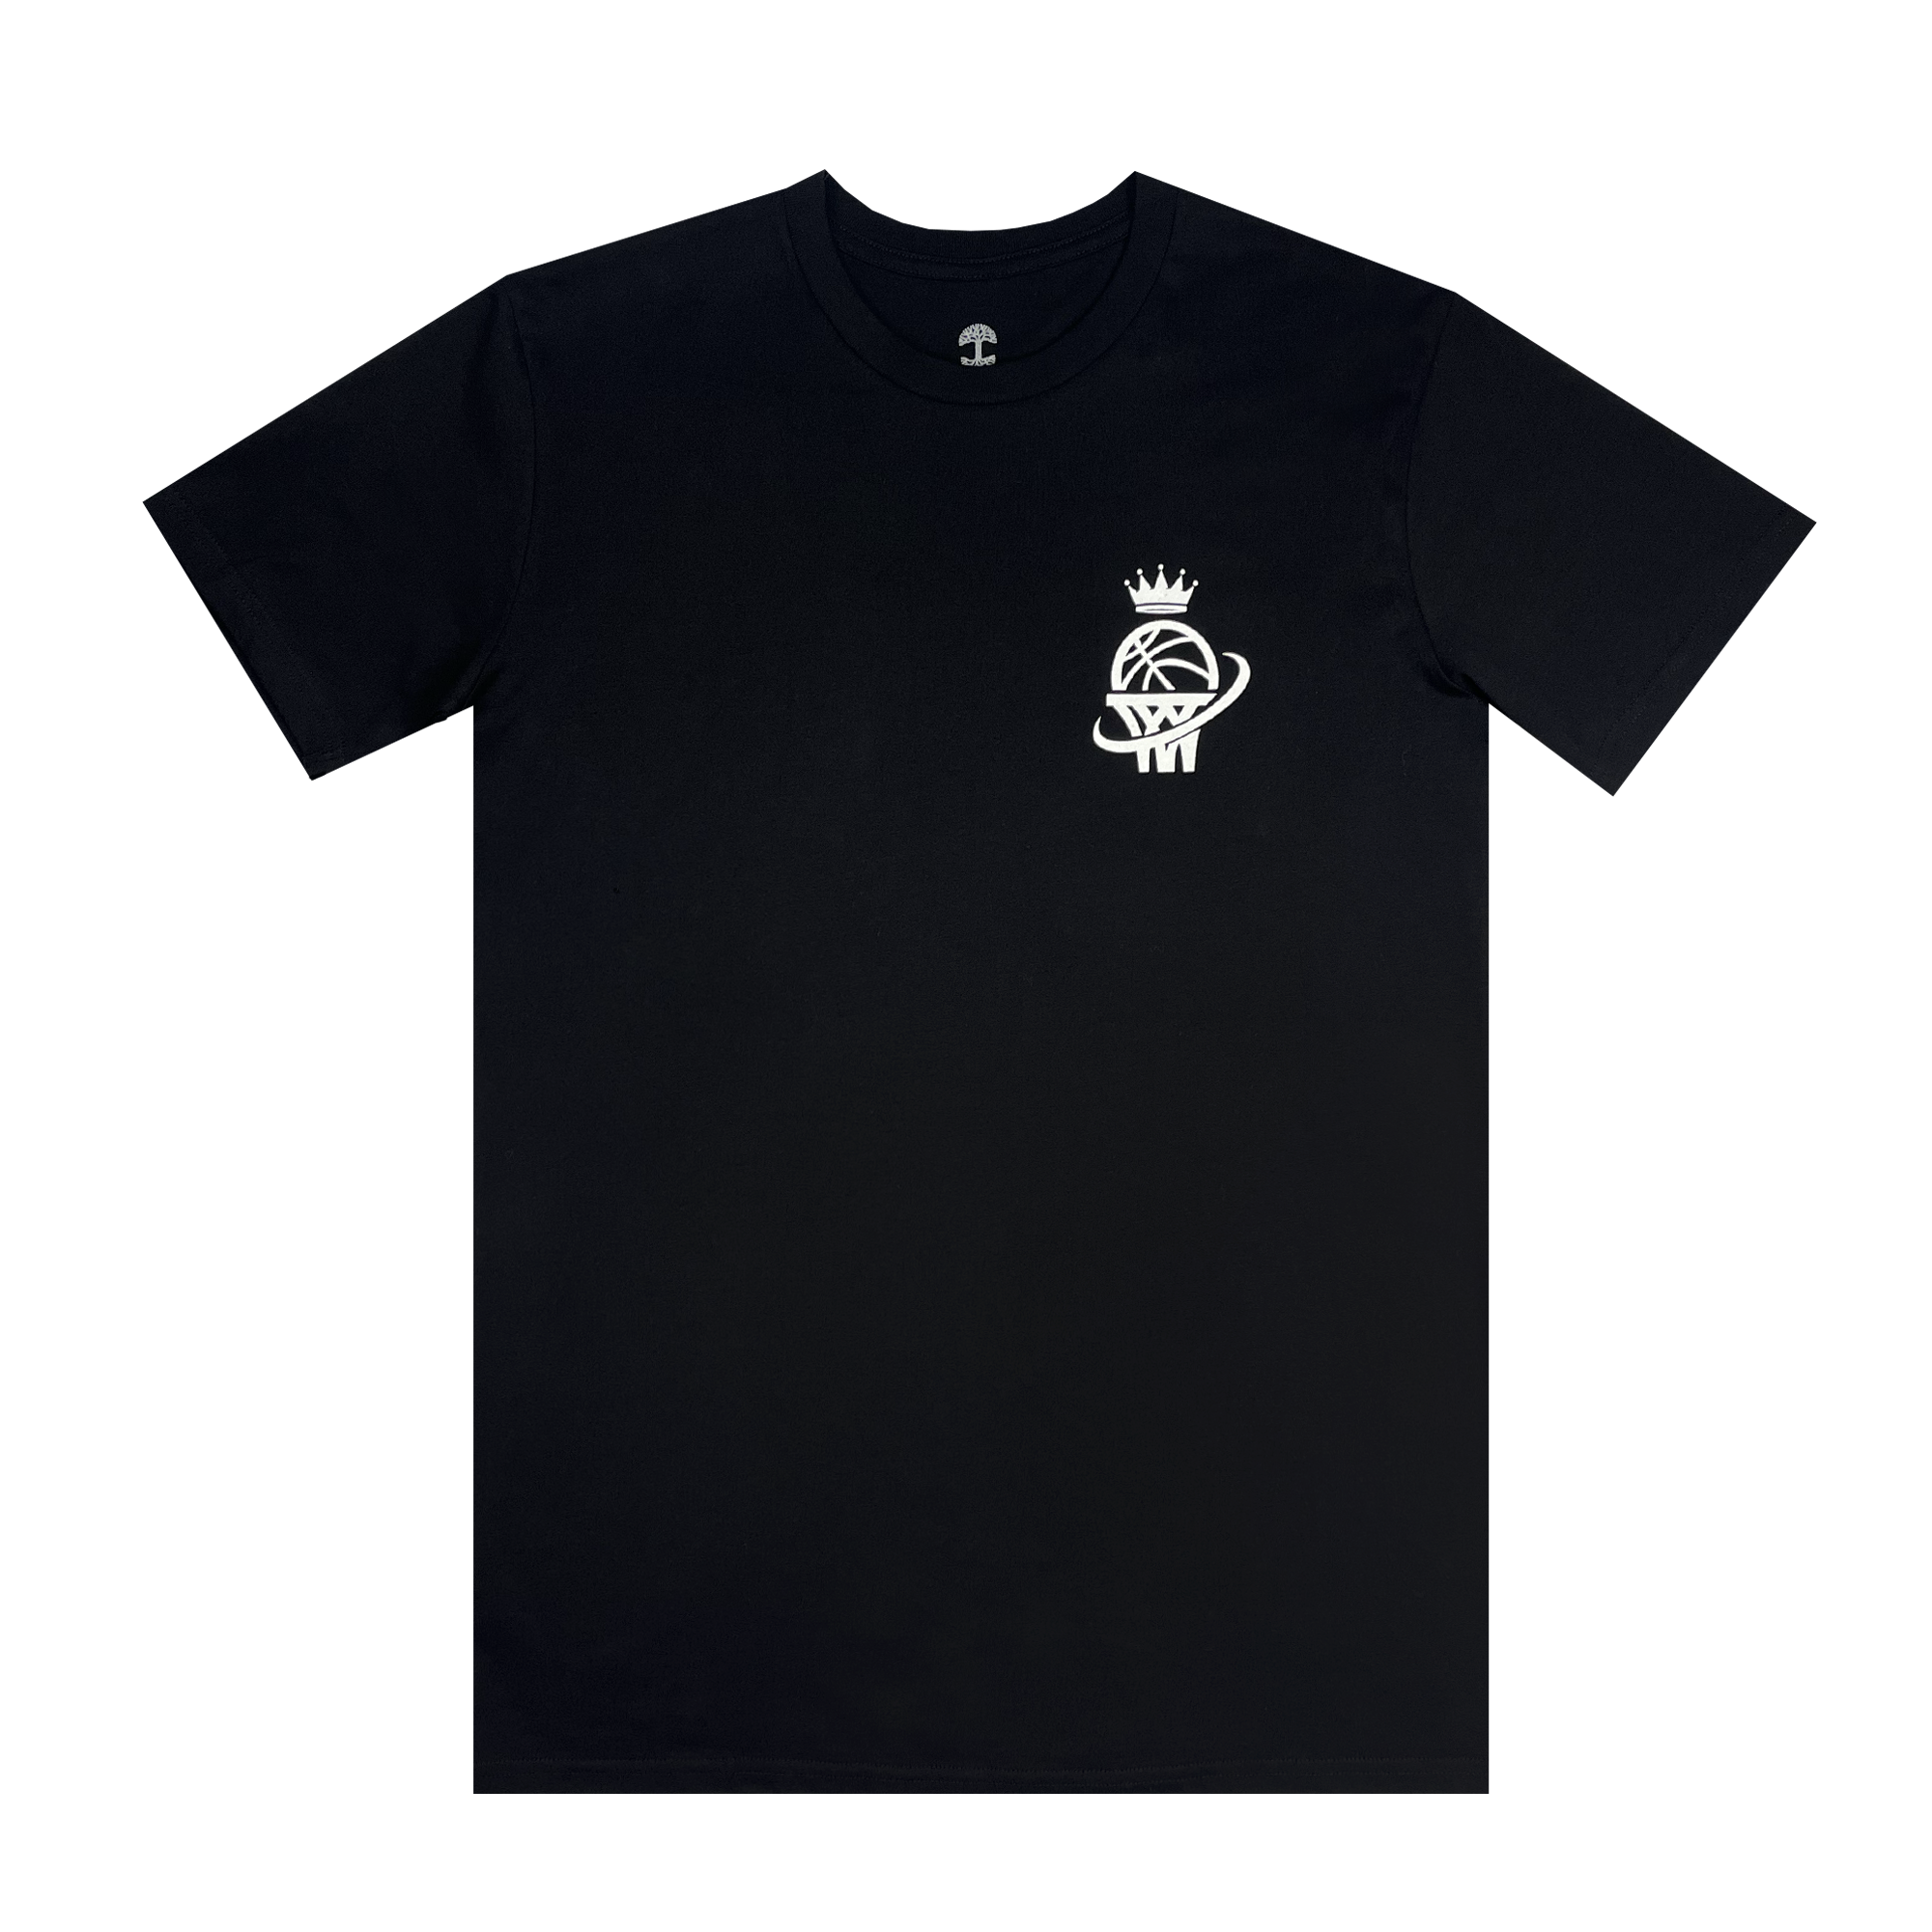  Front view of WPBA black t-shirt with WPBA logo on left chest in white.